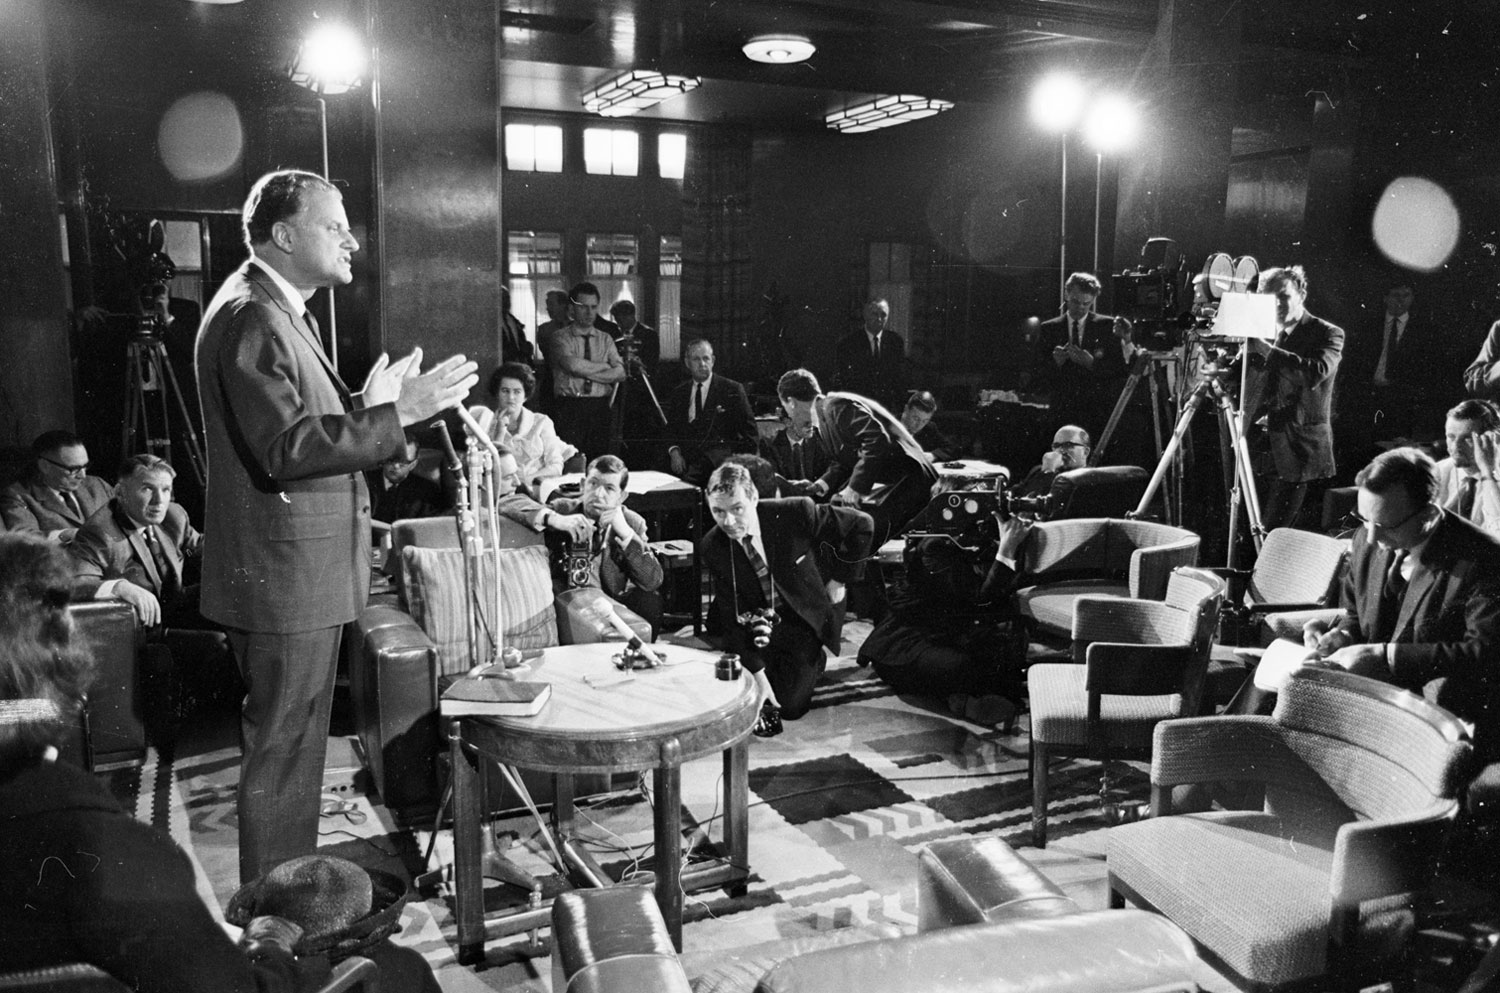 After his arrival in Southampton, England on another global set of Crusades, Graham speaks to reporters, May 24, 1966.